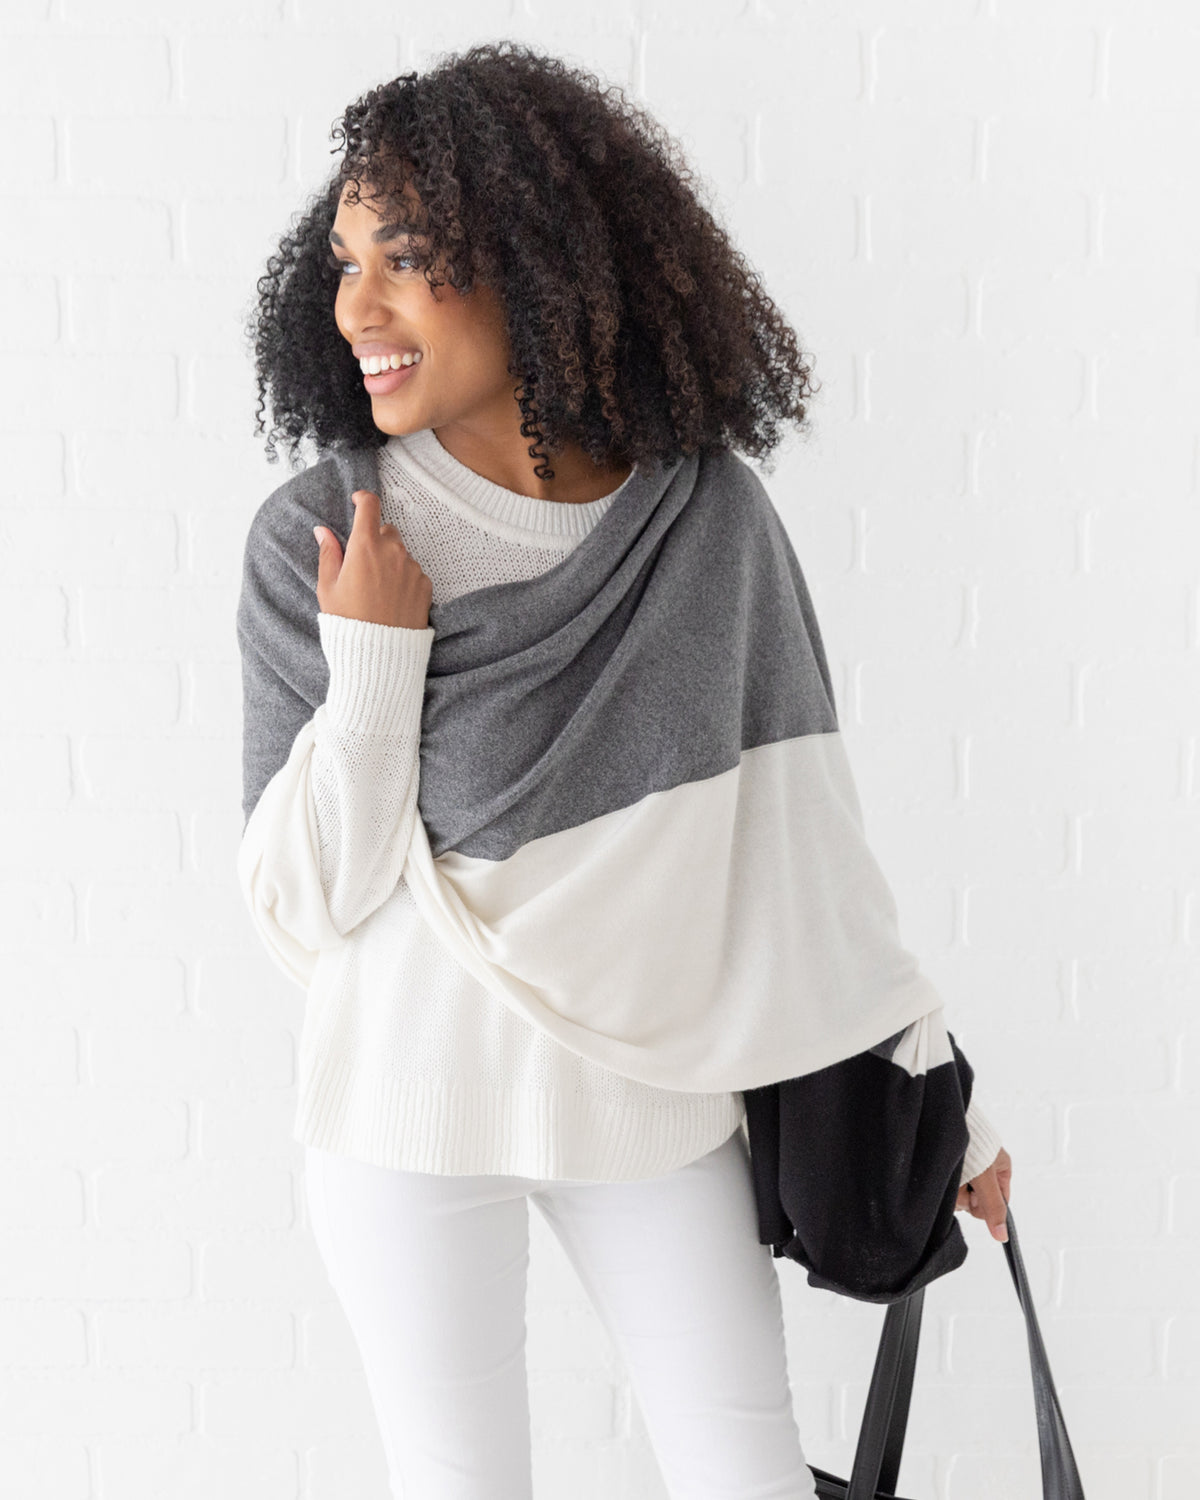 Woman wearing the Dreamsoft Travel Scarf in Gray Colorblock which is a black, gray and cream scarf, holding a bag and smiling